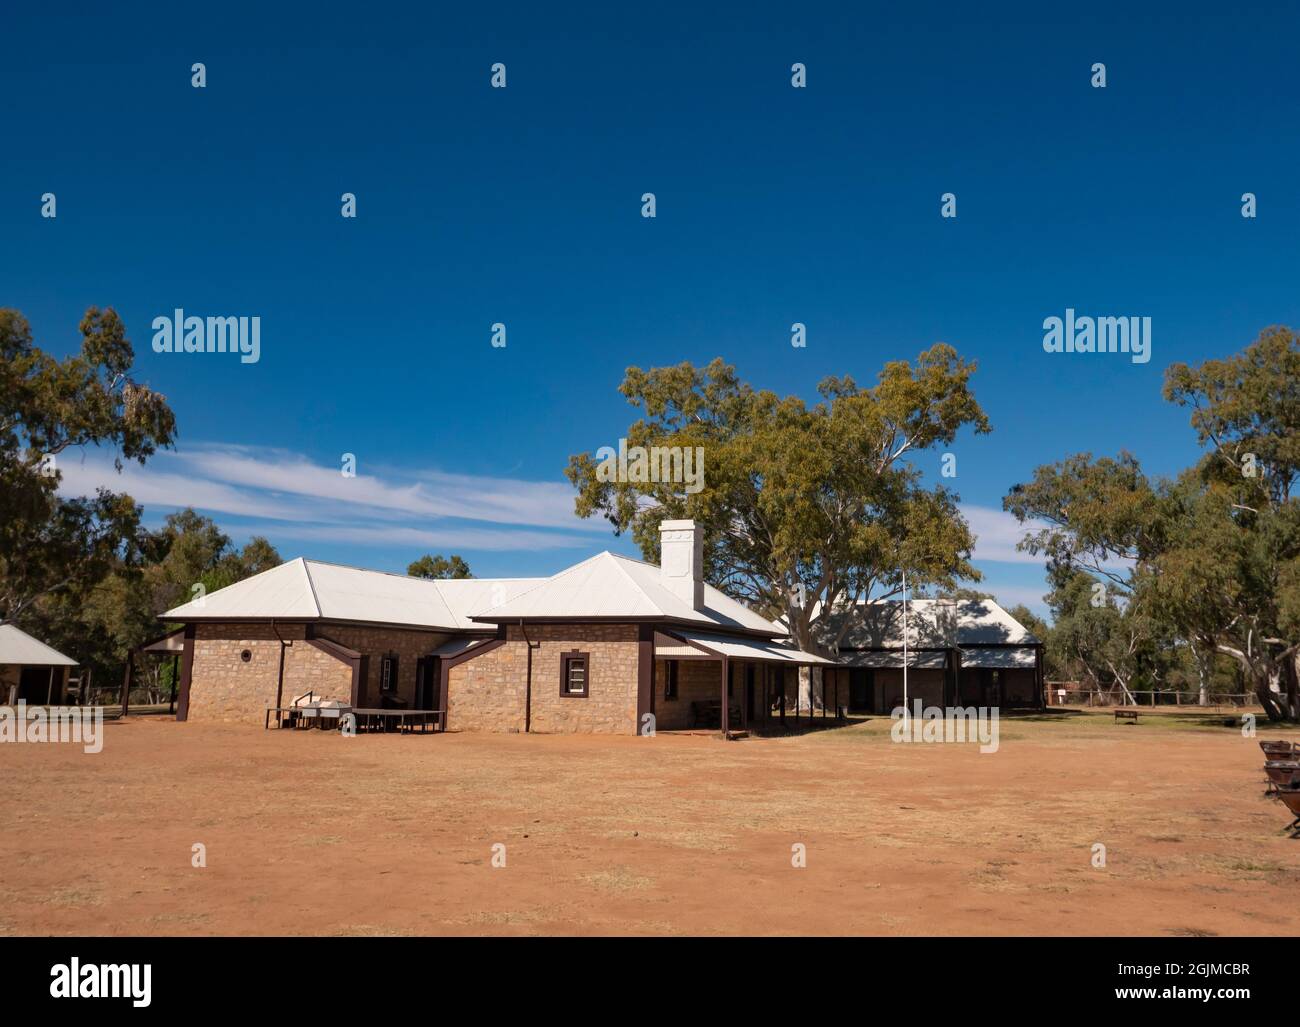 Overland Telegraph Station at Alice Springs. Heritage tourist attraction in Central Australia. Stock Photo